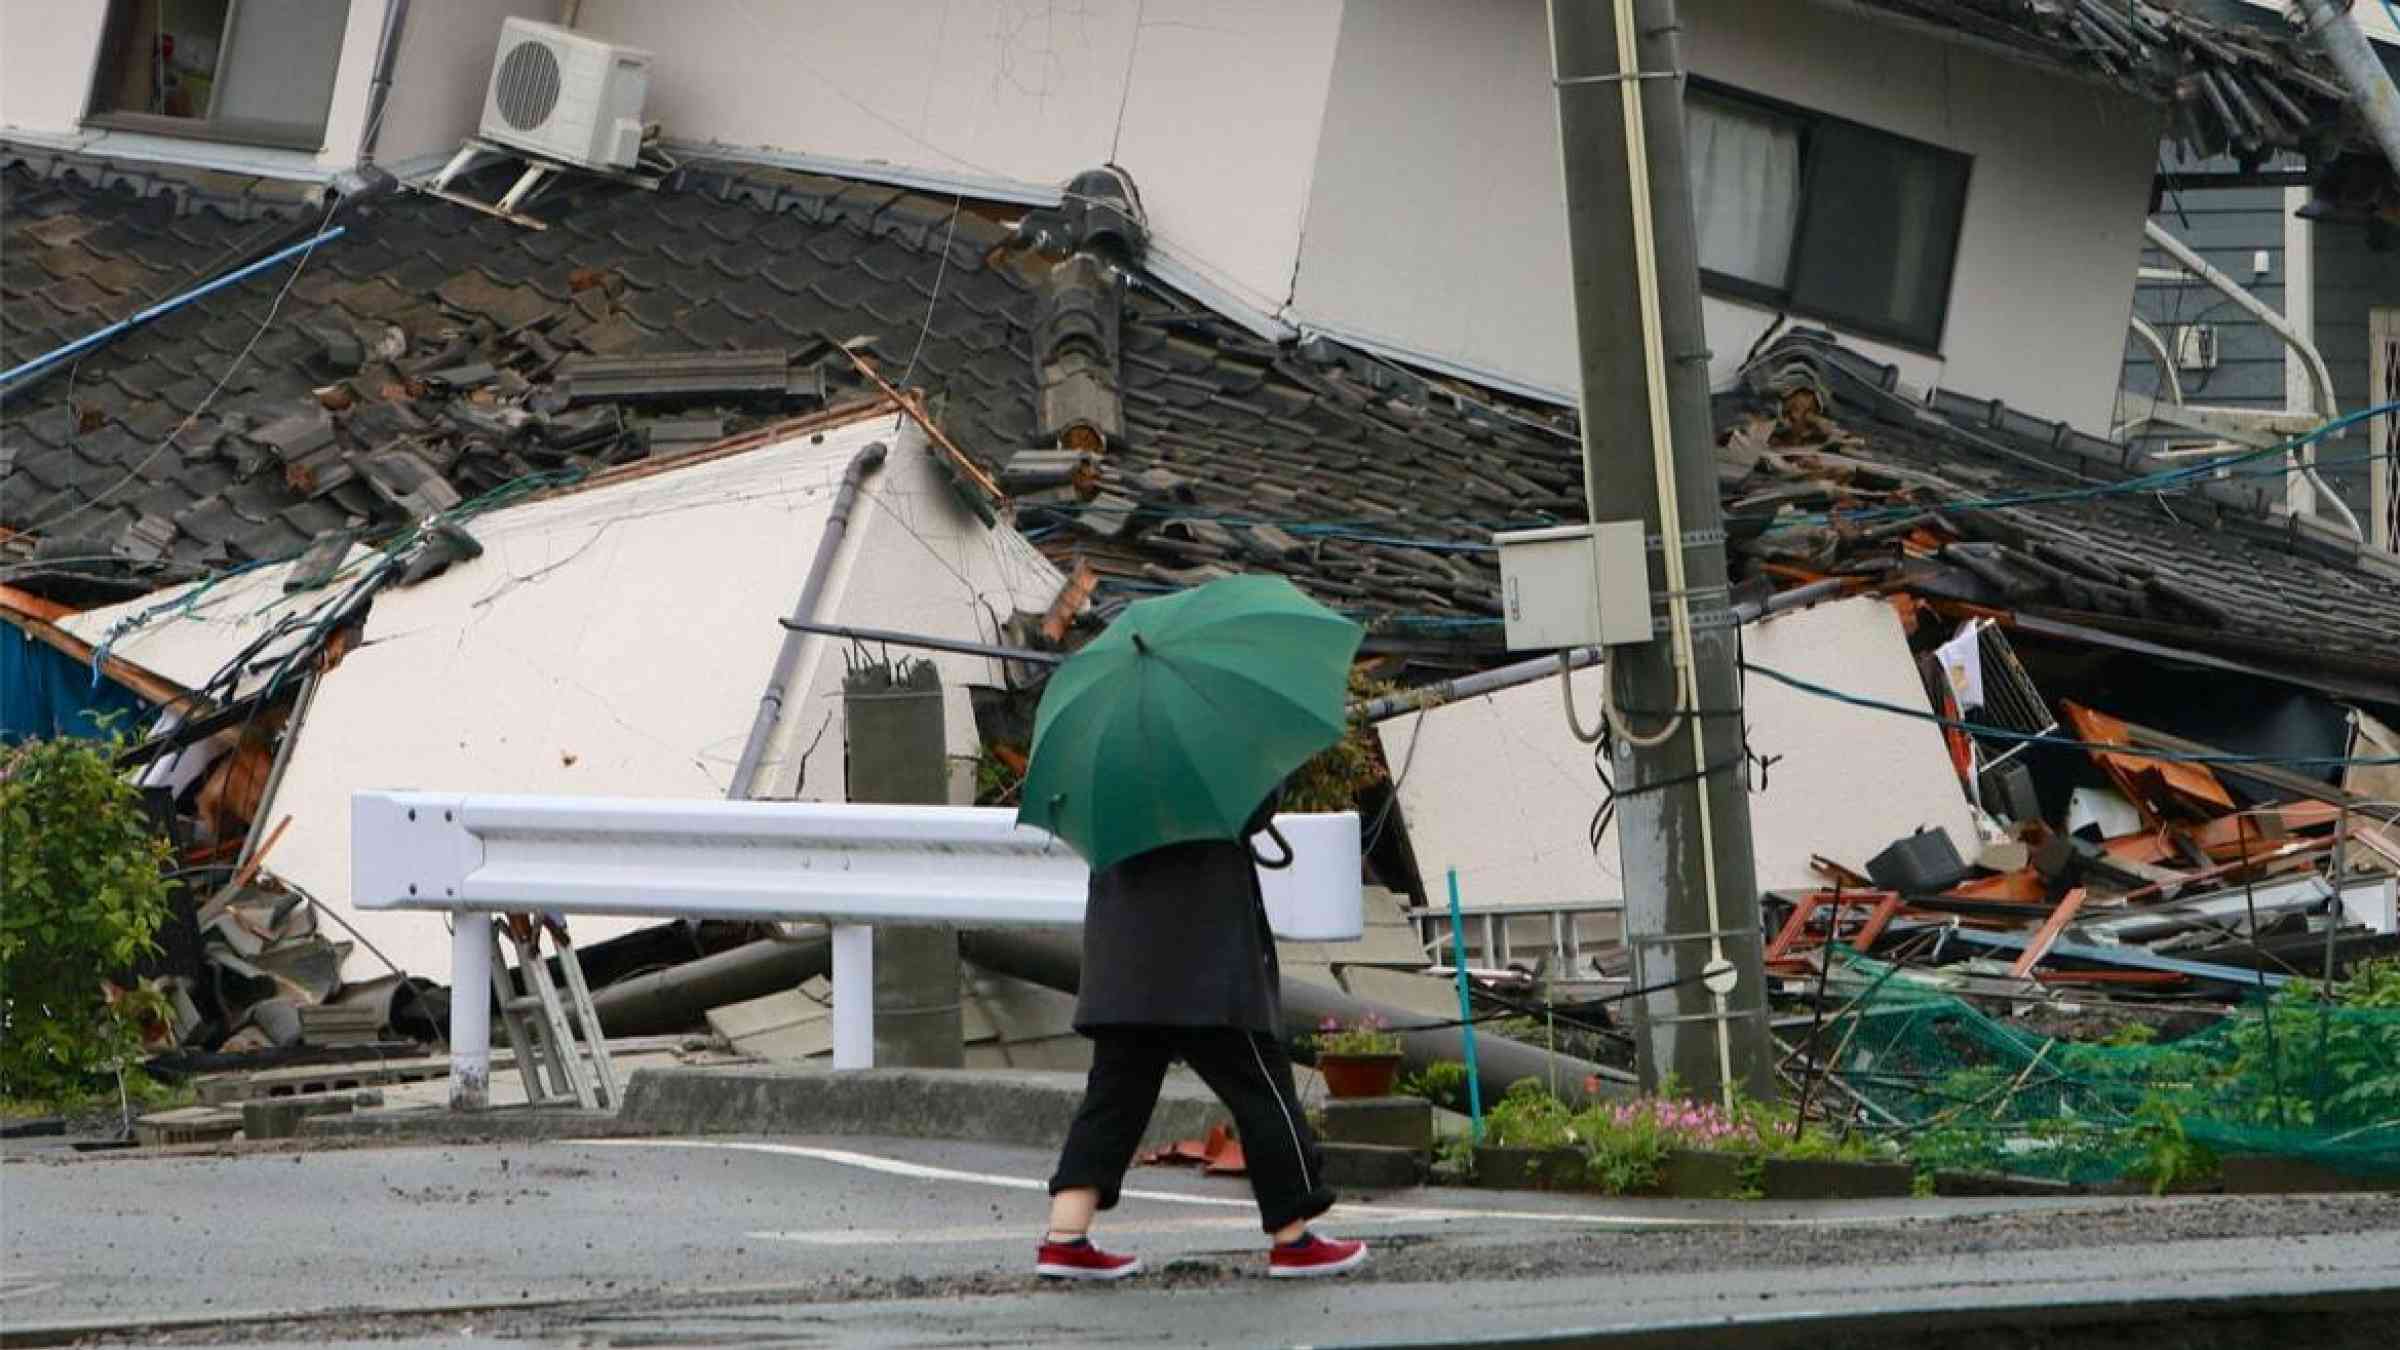 A resident walks past a collapsed house in the aftermath of the 2011 Tōhoku earthquake